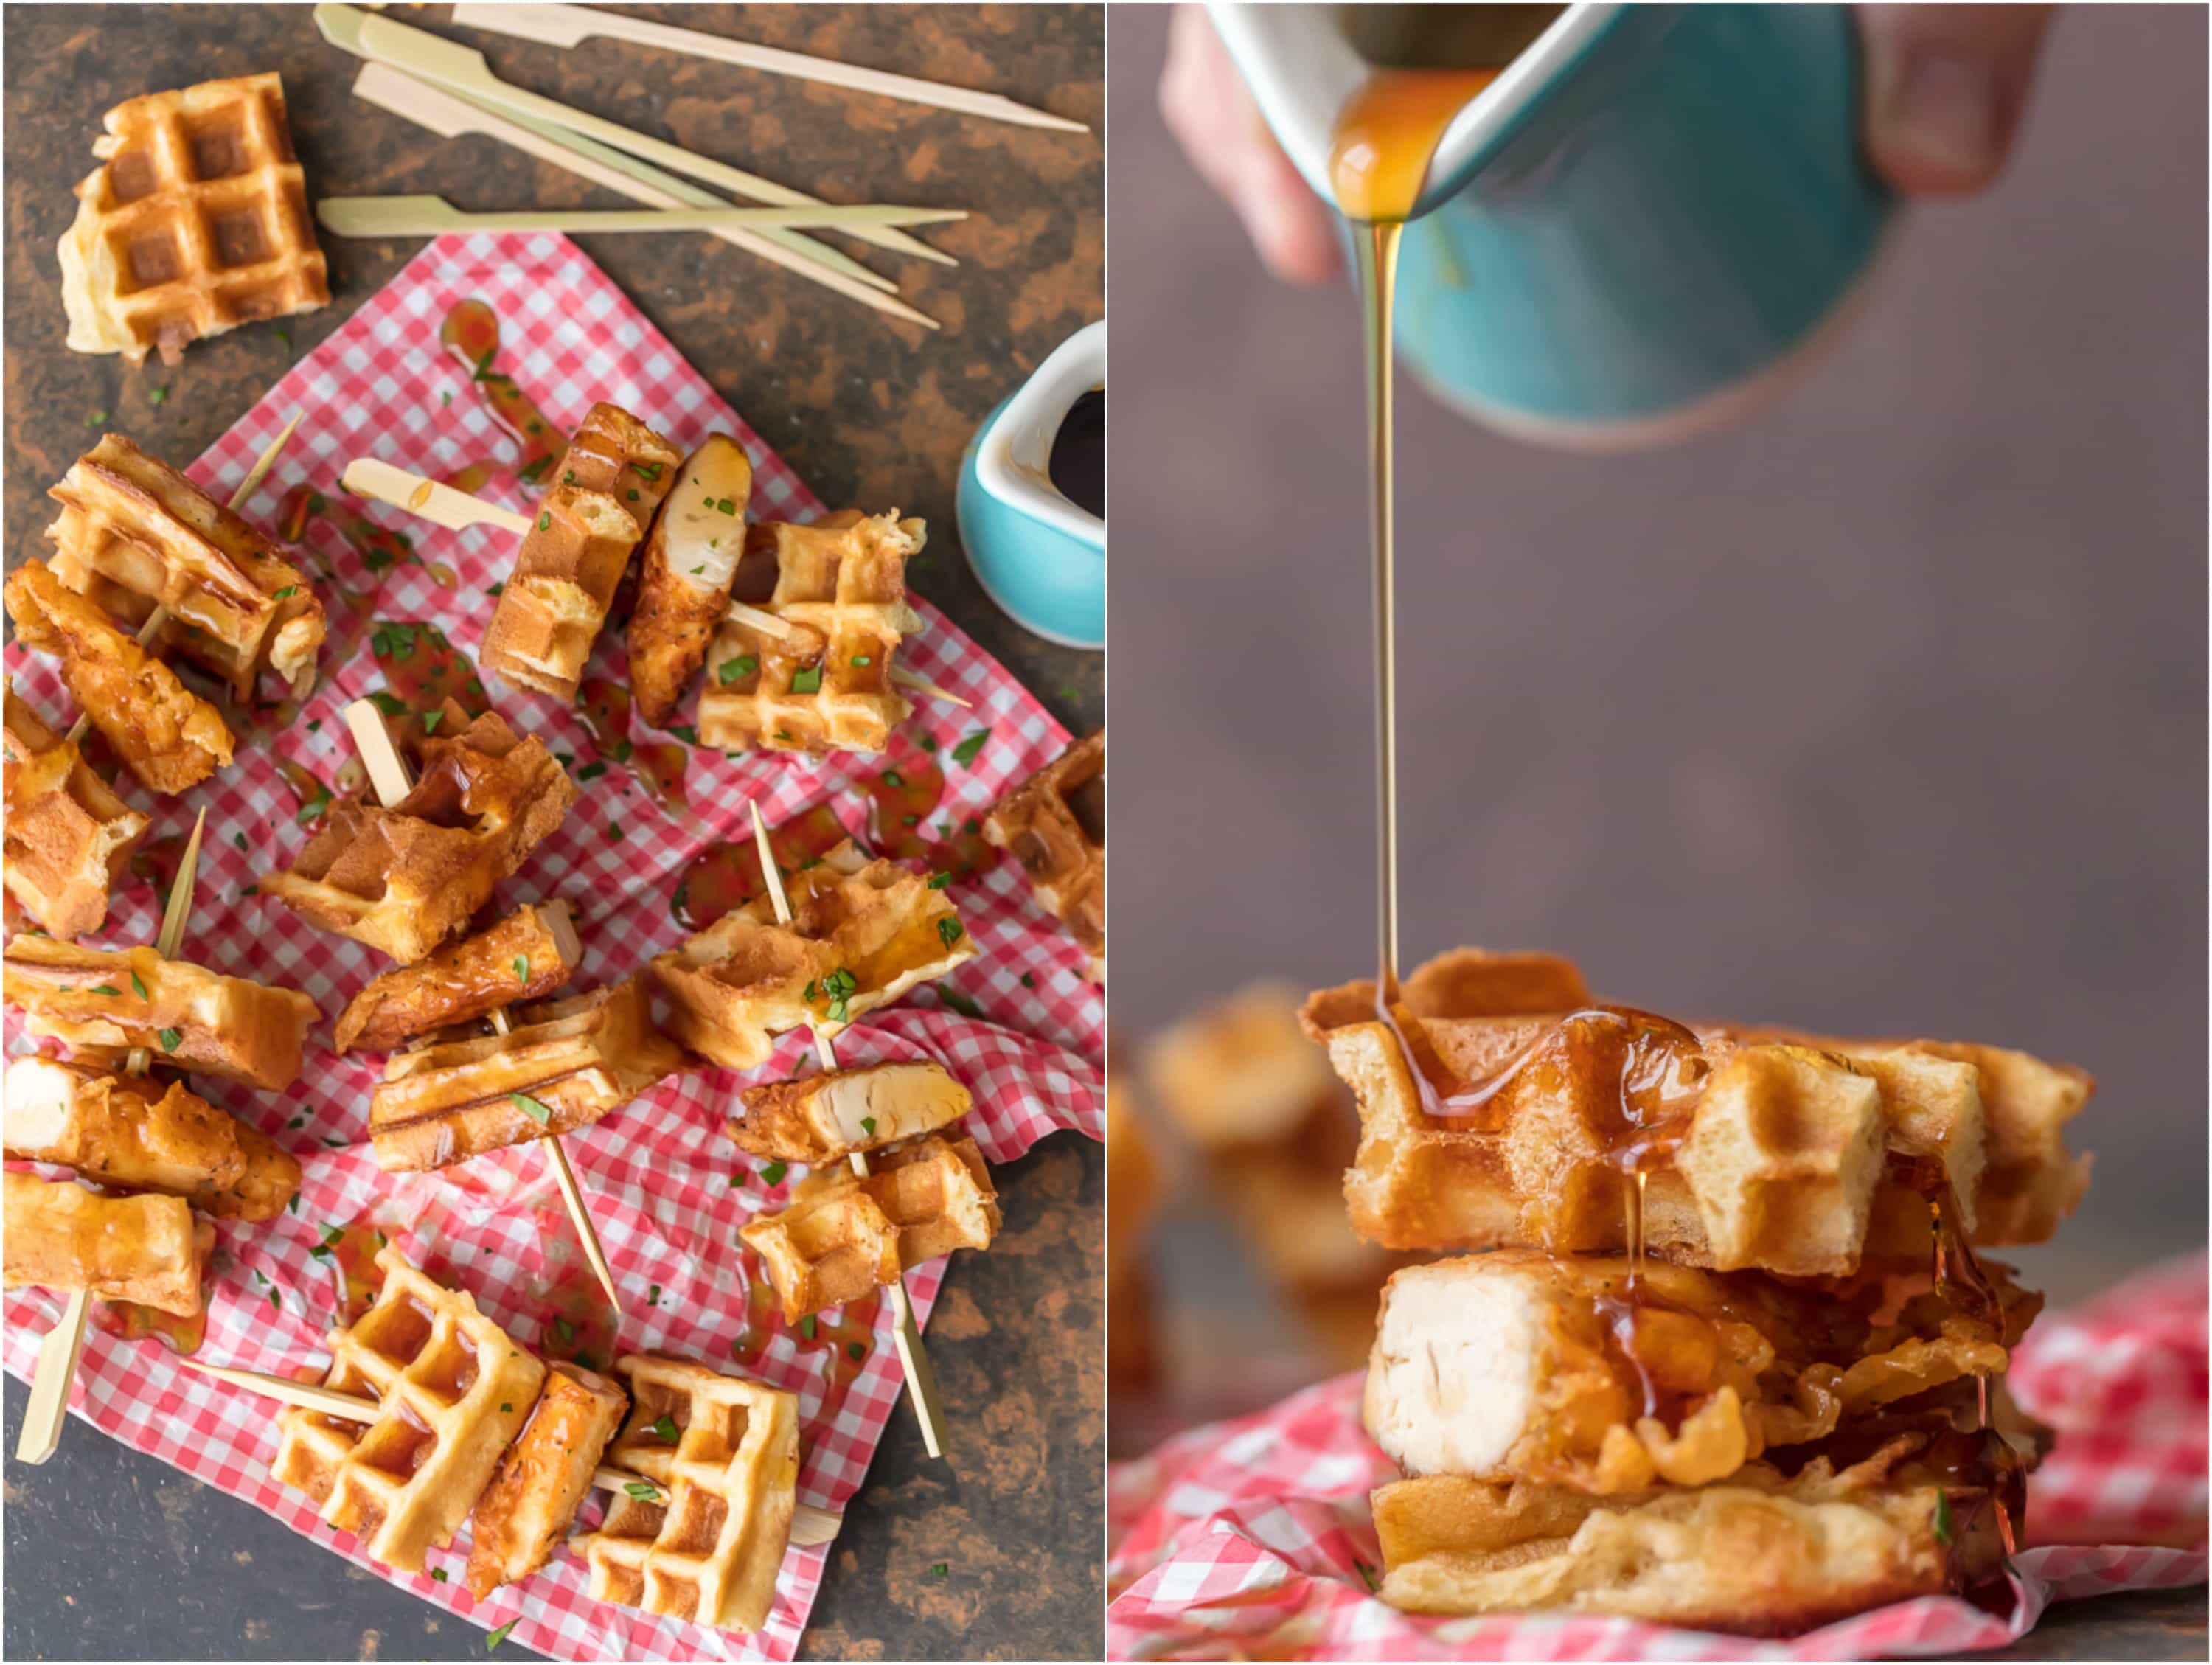 https://www.thecookierookie.com/wp-content/uploads/2017/12/mini-chicken-and-waffles-skewers-collage1.jpeg